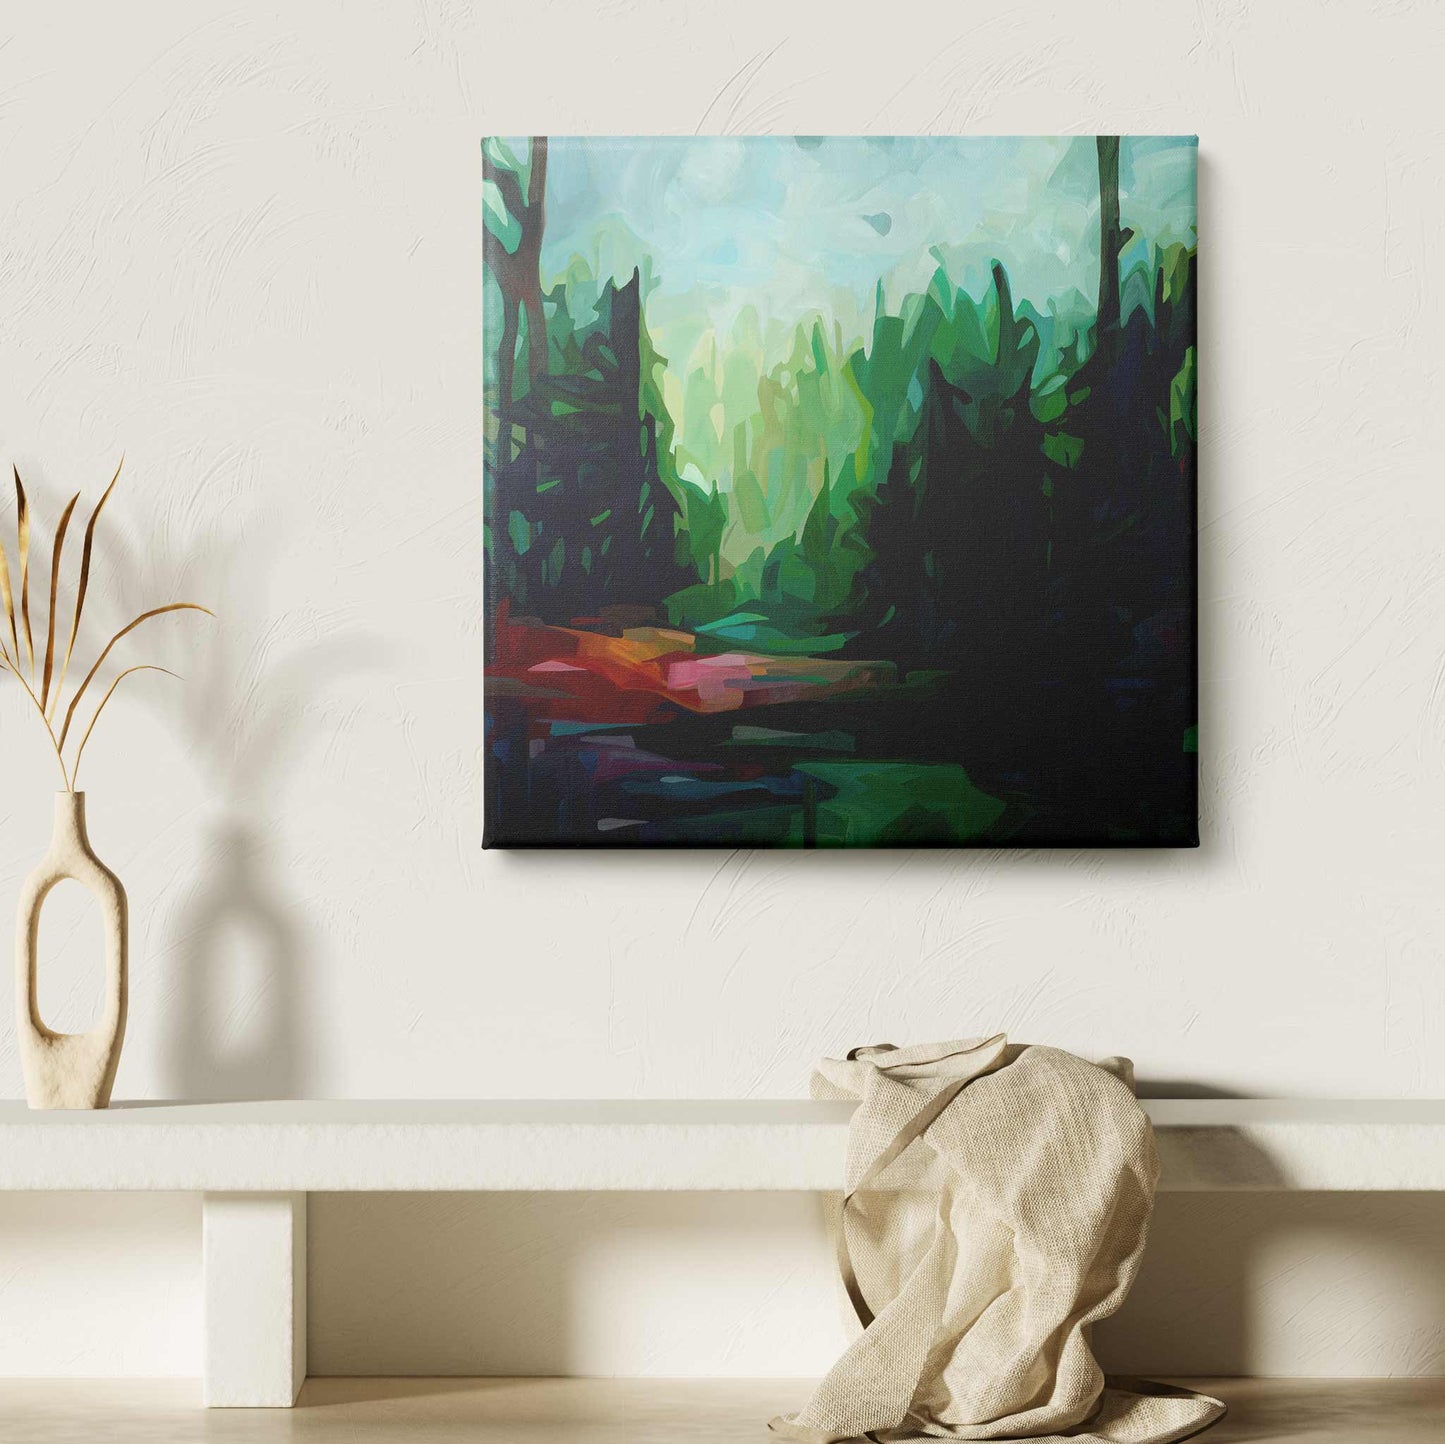 Canvas art print of a deep green forest painting by Canadian abstract artist Susannah Bleasby